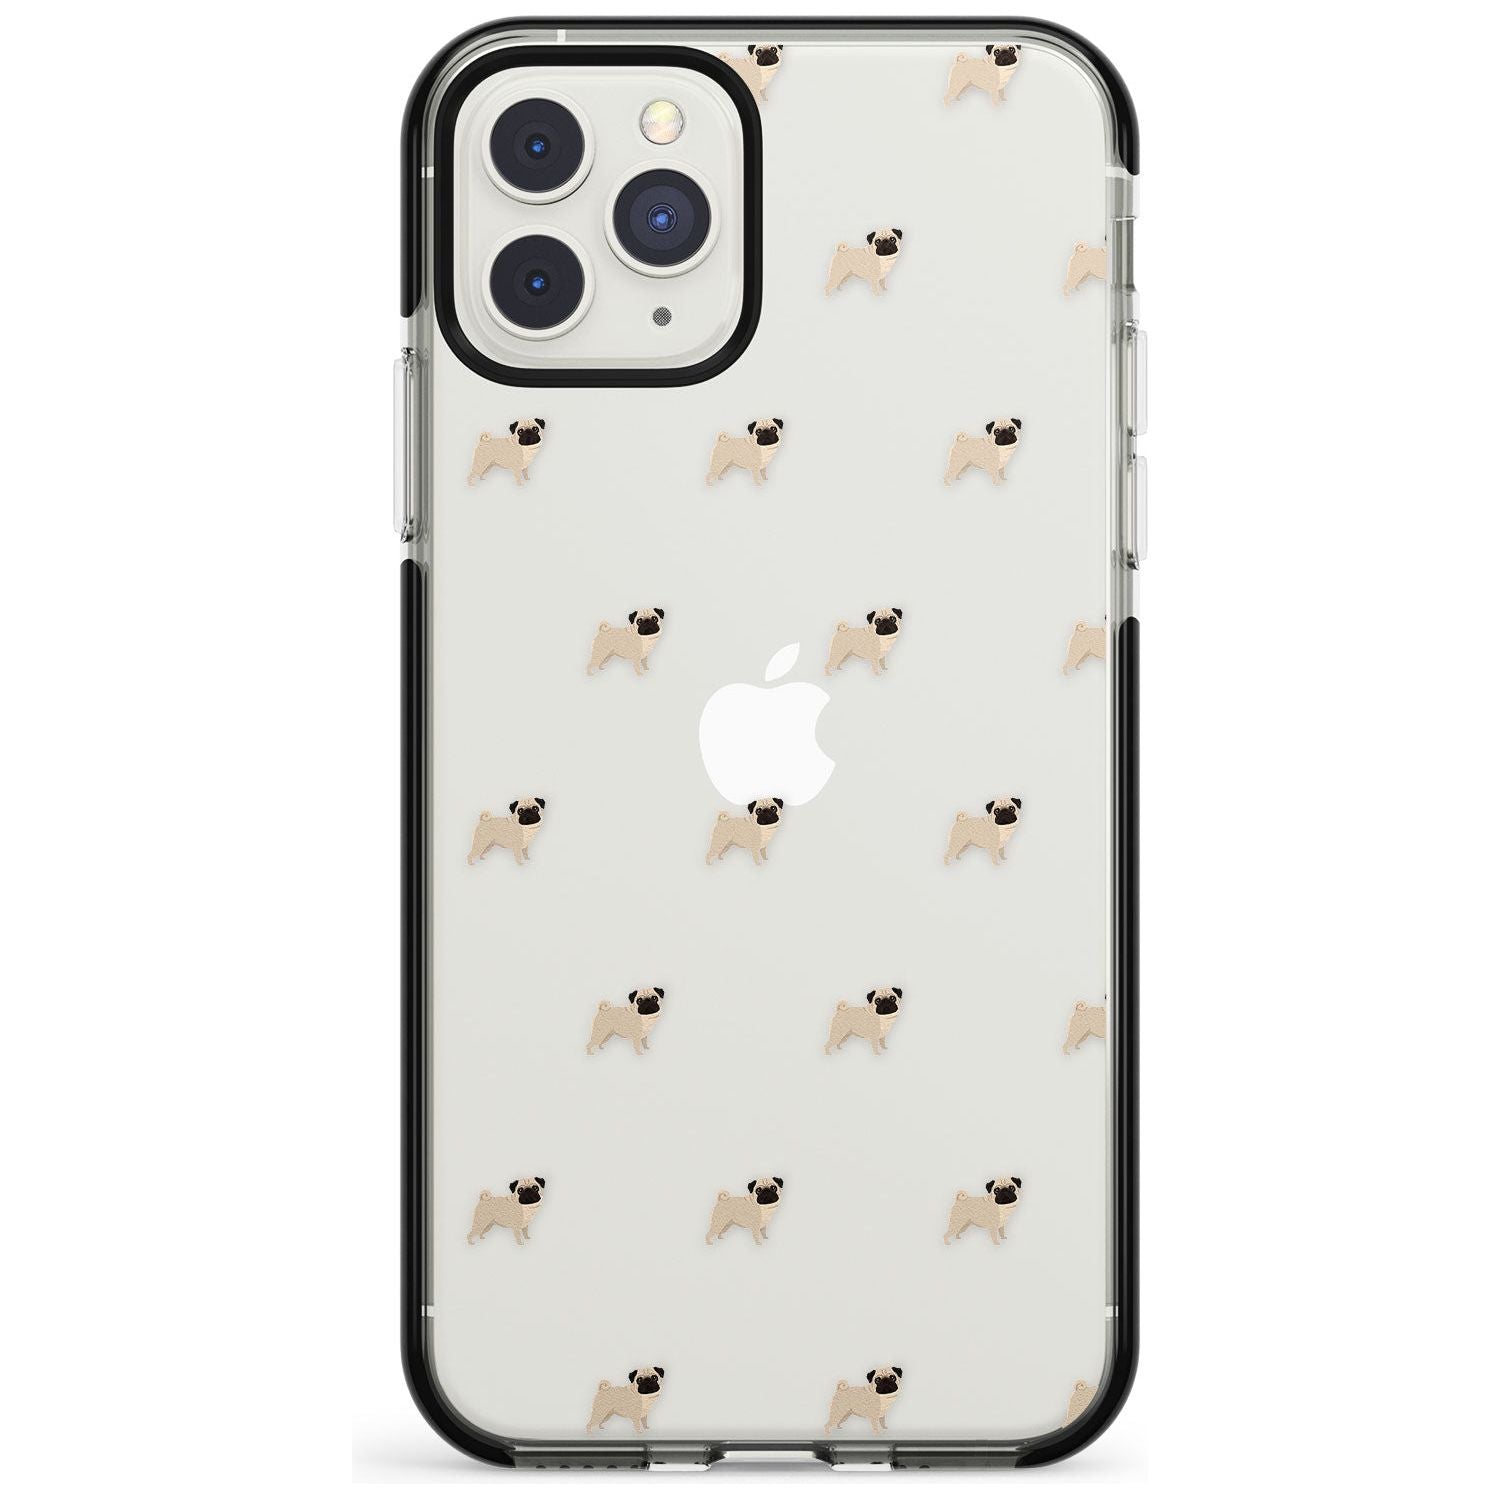 Pug Dog Pattern Clear Black Impact Phone Case for iPhone 11 Pro Max